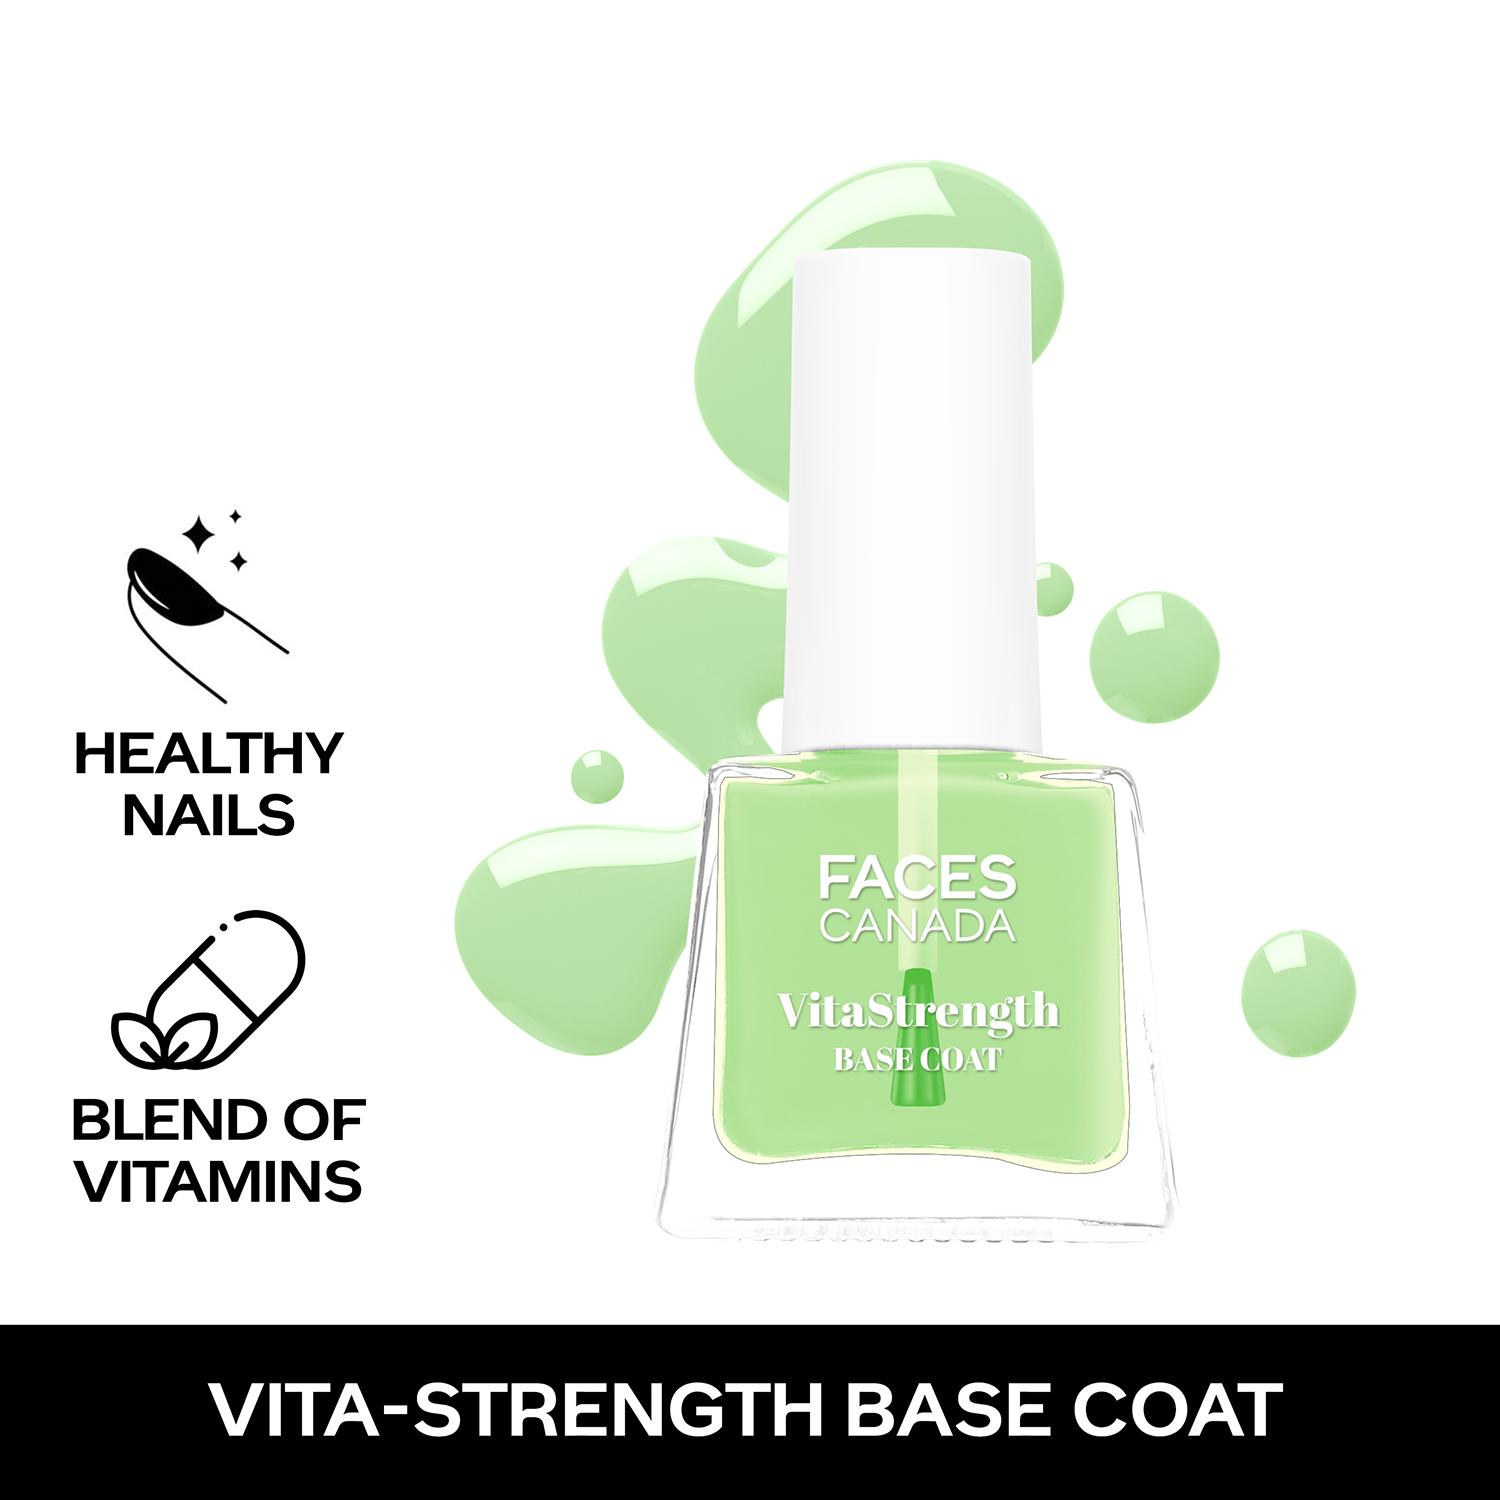 Faces Canada | Faces Canada VitaStrength Base Coat, Strengthens & Brightens Nails, Multivitamin (5 ml)